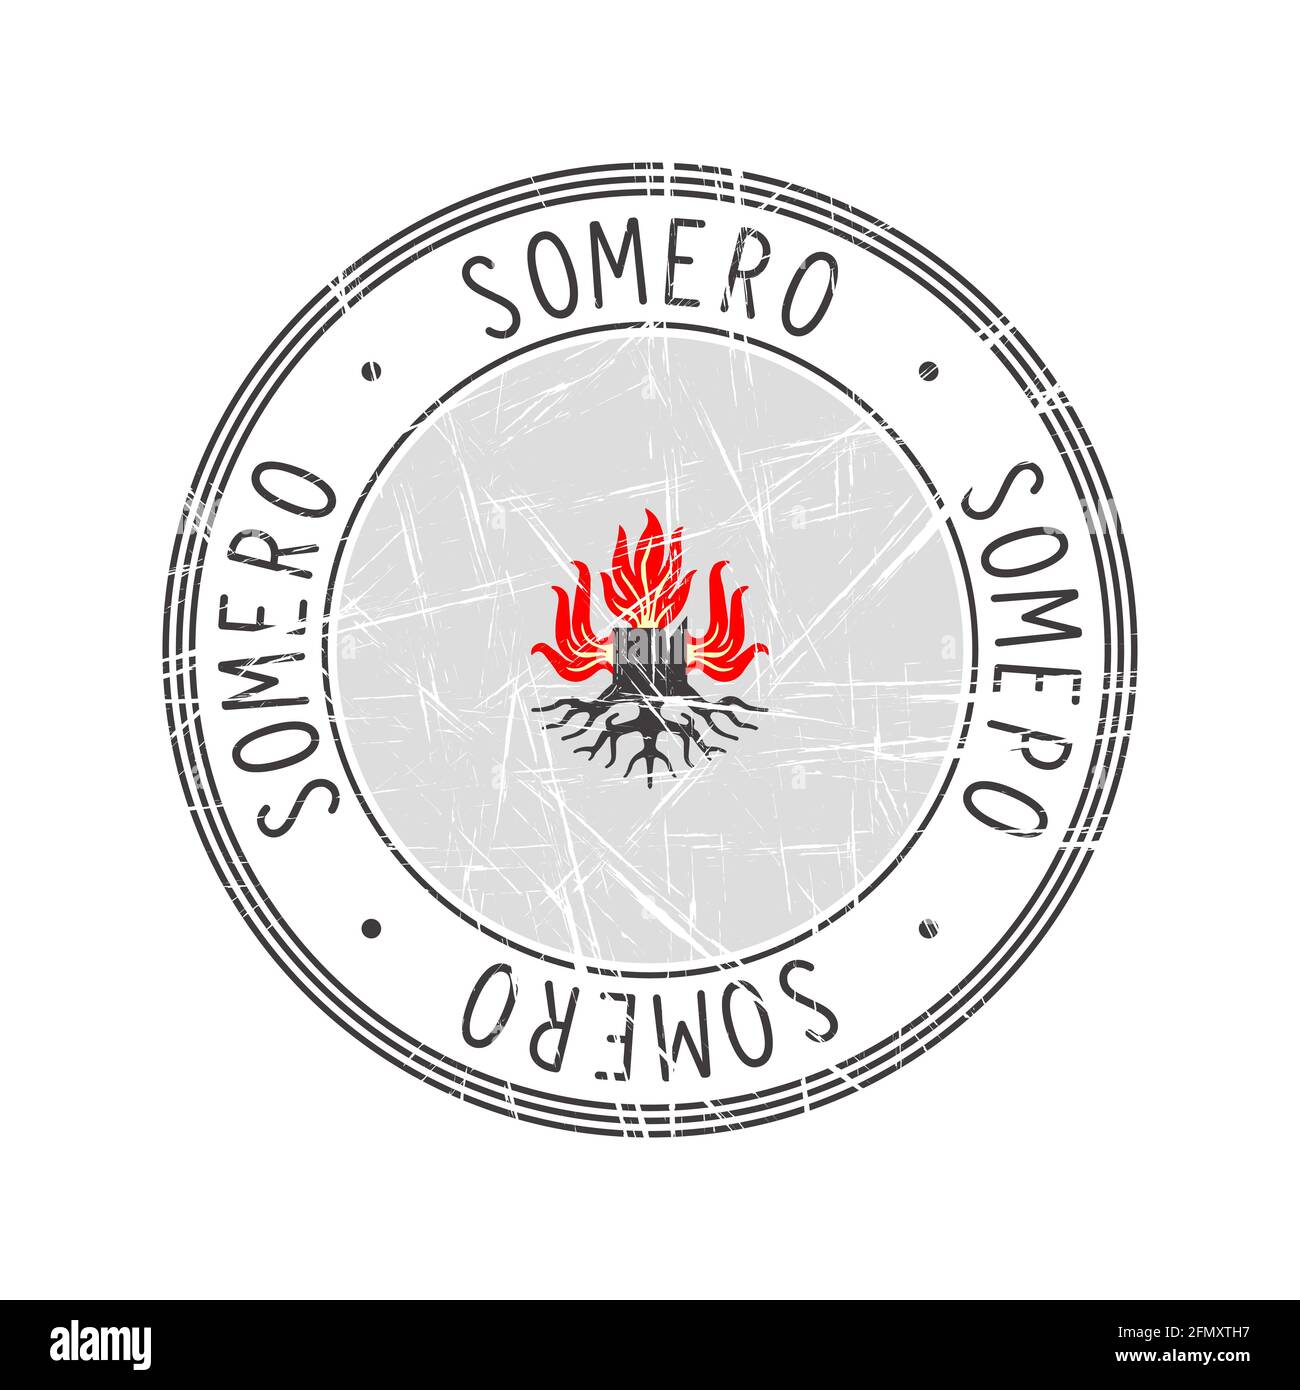 Somero city, Finland. Grunge postal rubber stamp over white background Stock Vector